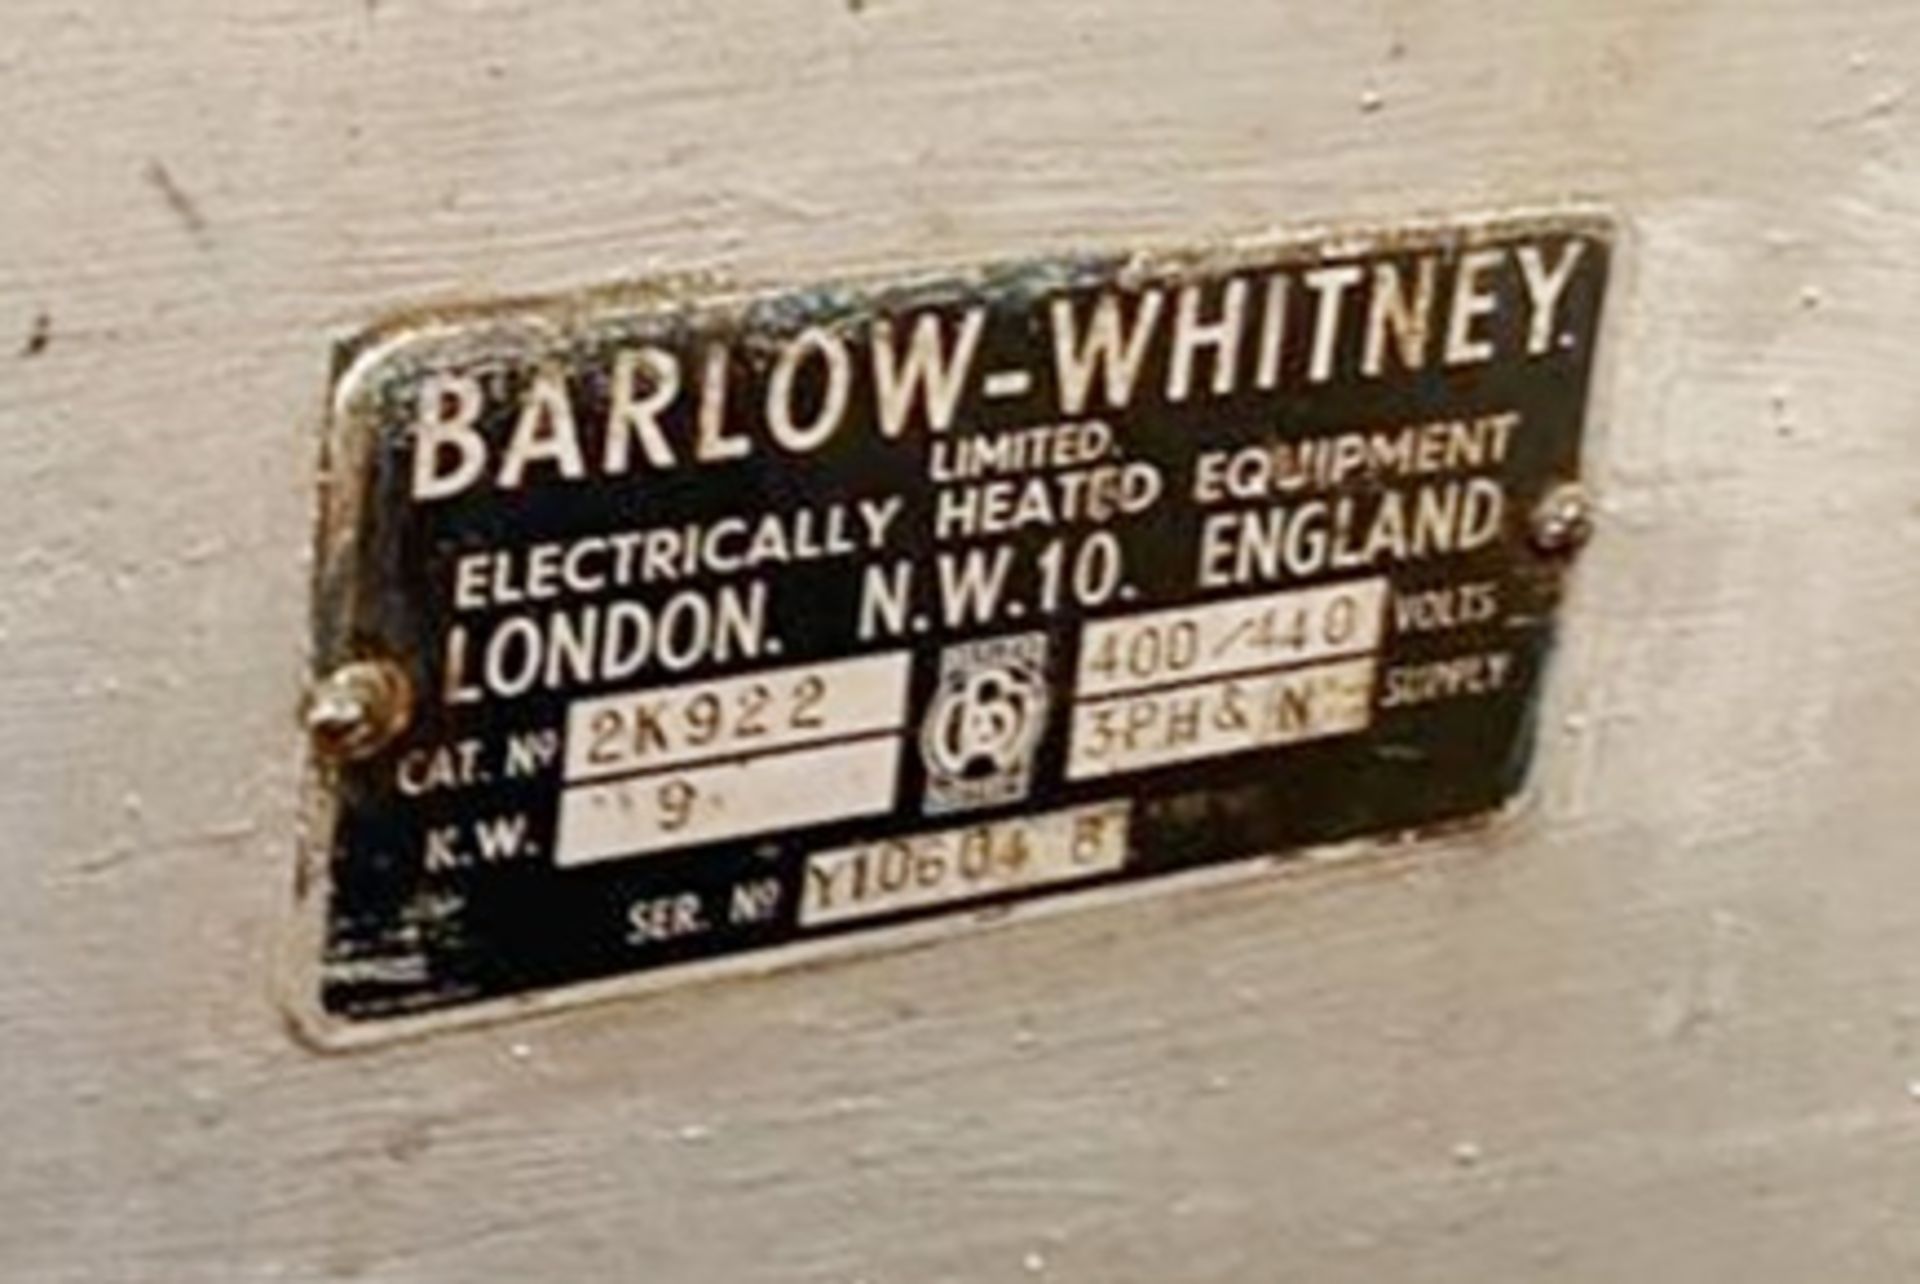 1 x Barlow-Whitney 3 Phase Industrial Oven For Baking, Curing and Drying - Model Number: 2K922 - Image 3 of 4